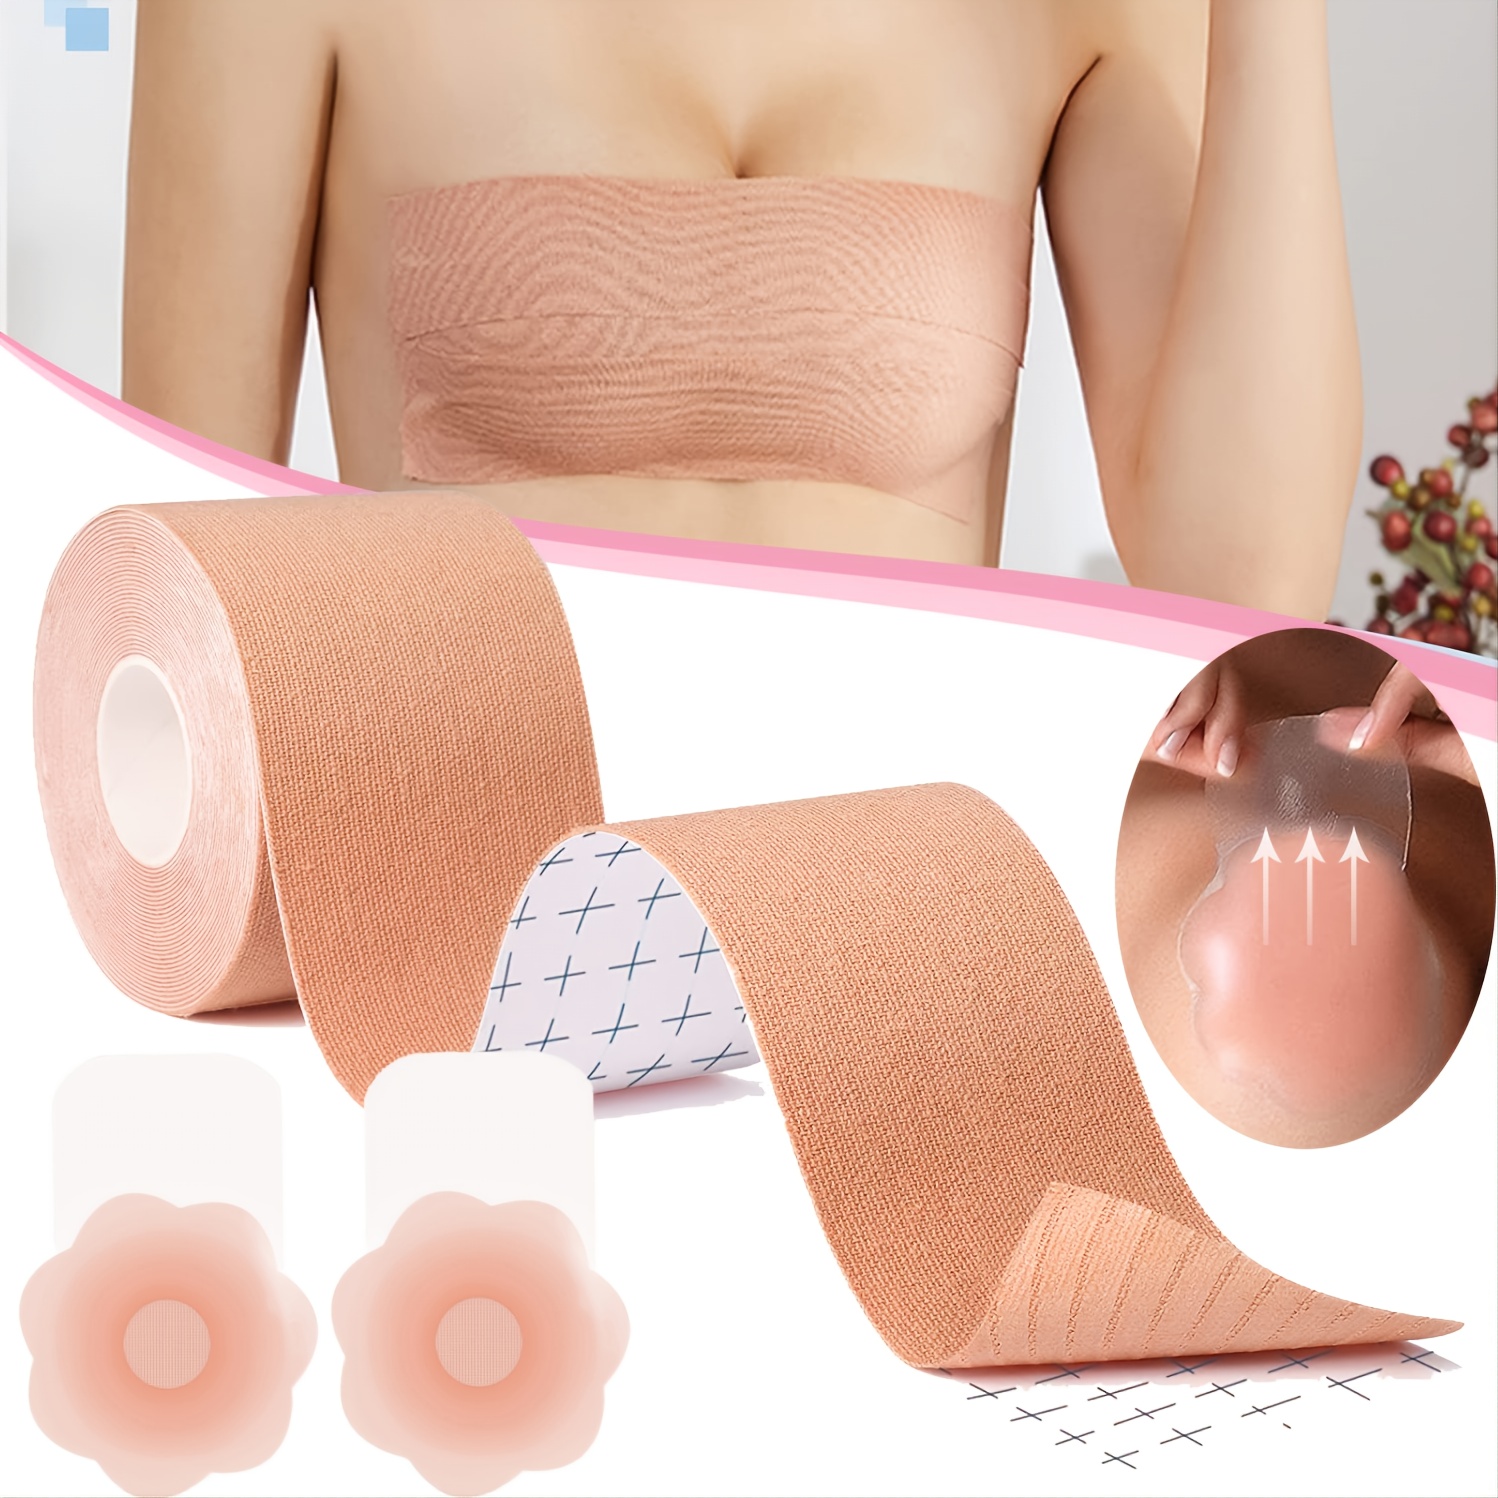 Boob Tape, Breast Lift Tape, Body Tape For Breast Support Lift